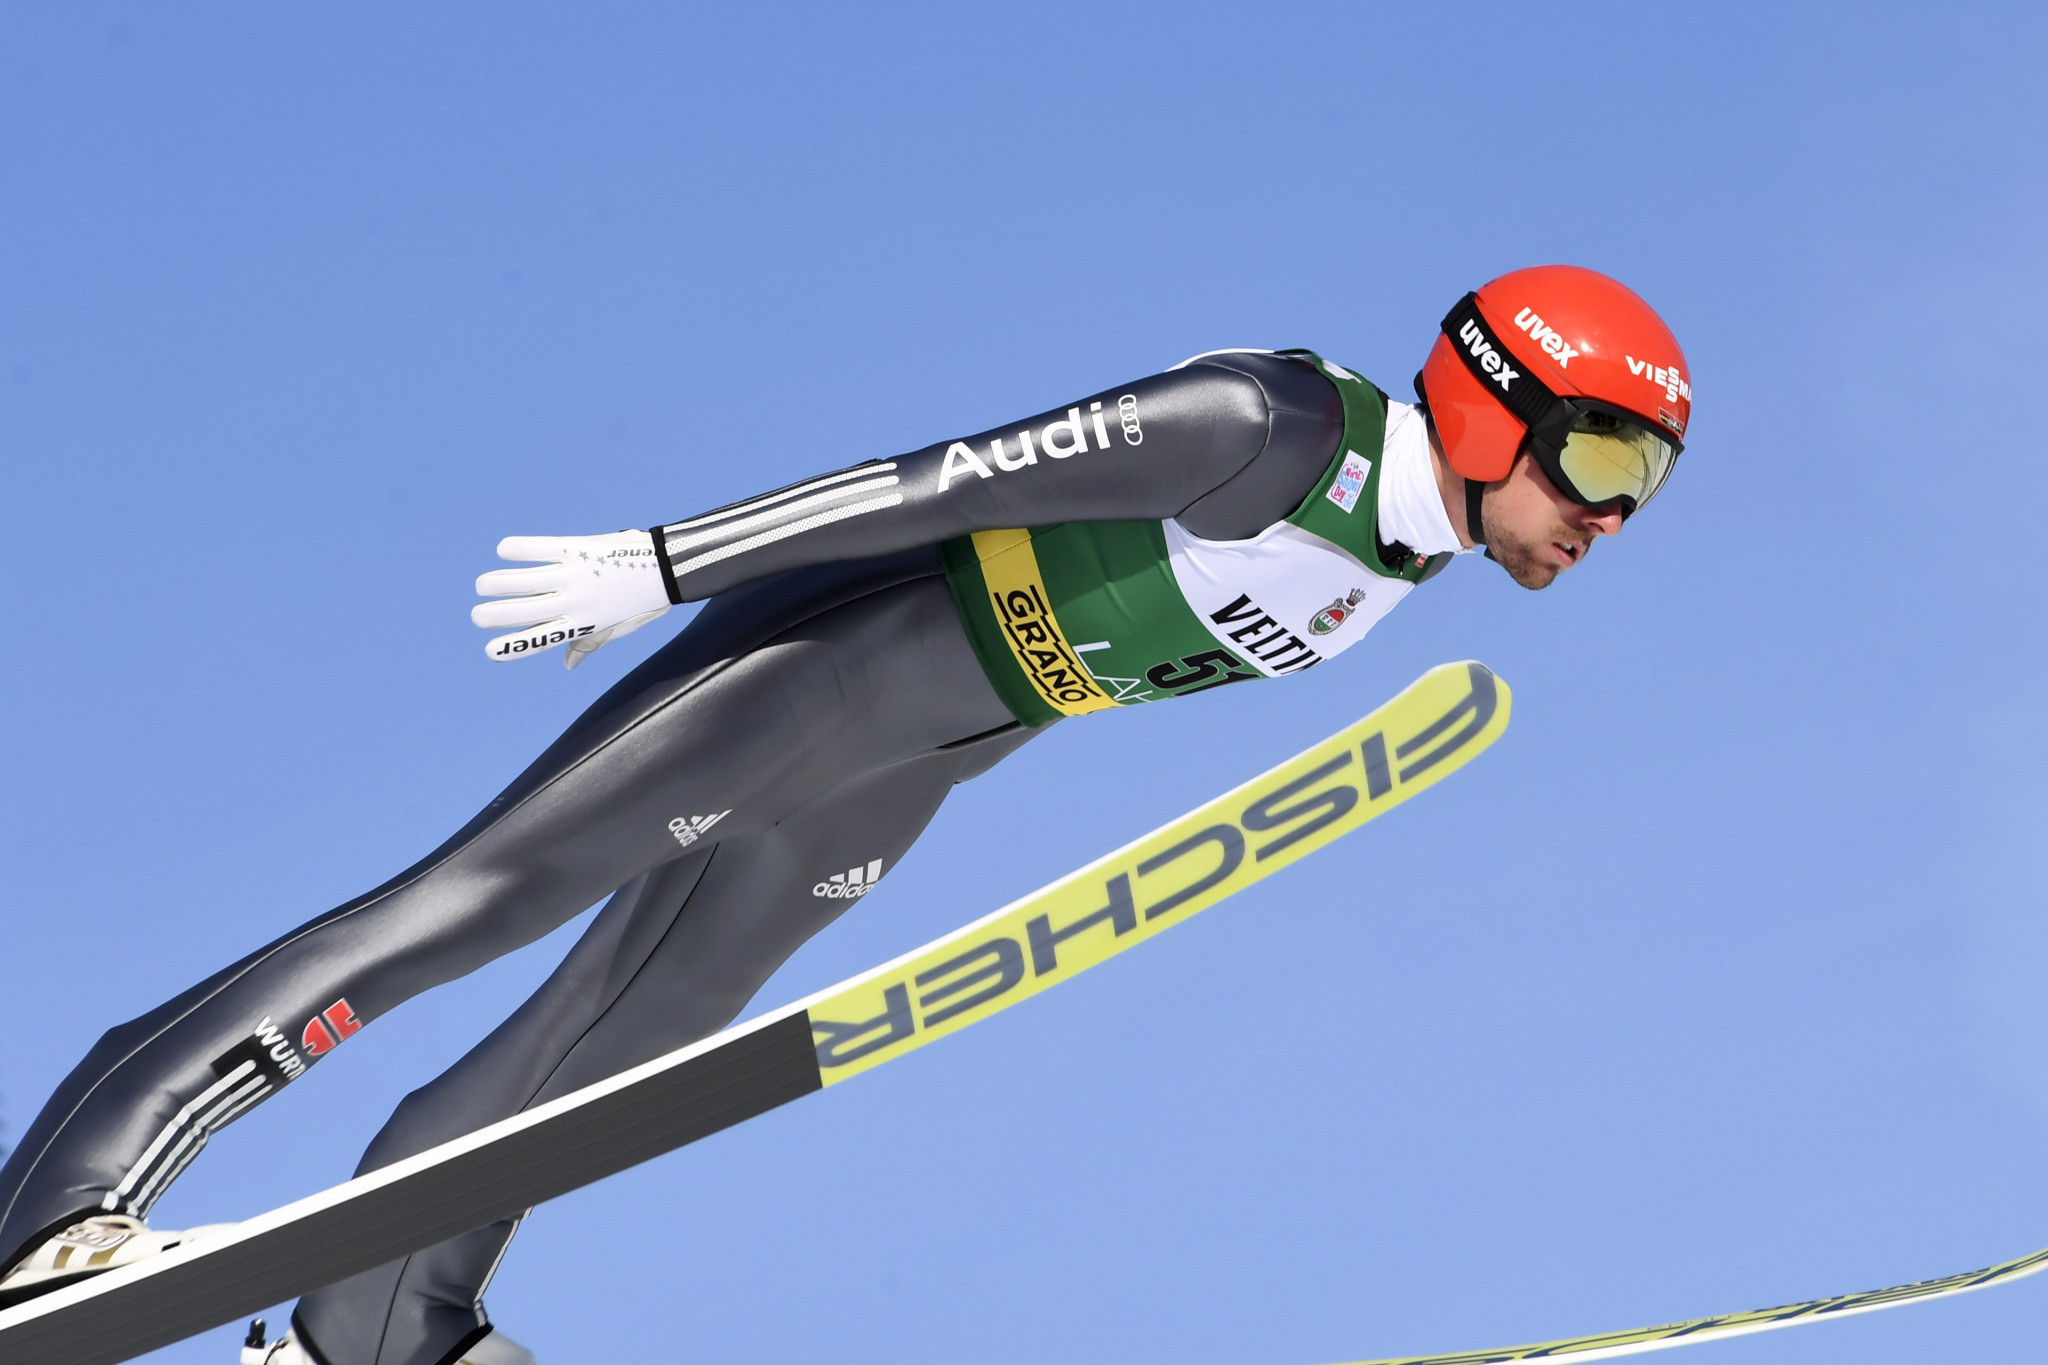 World and Olympic champion Johannes Rydzek is among the participants at the Nordic Combined World Cup ©Getty Images